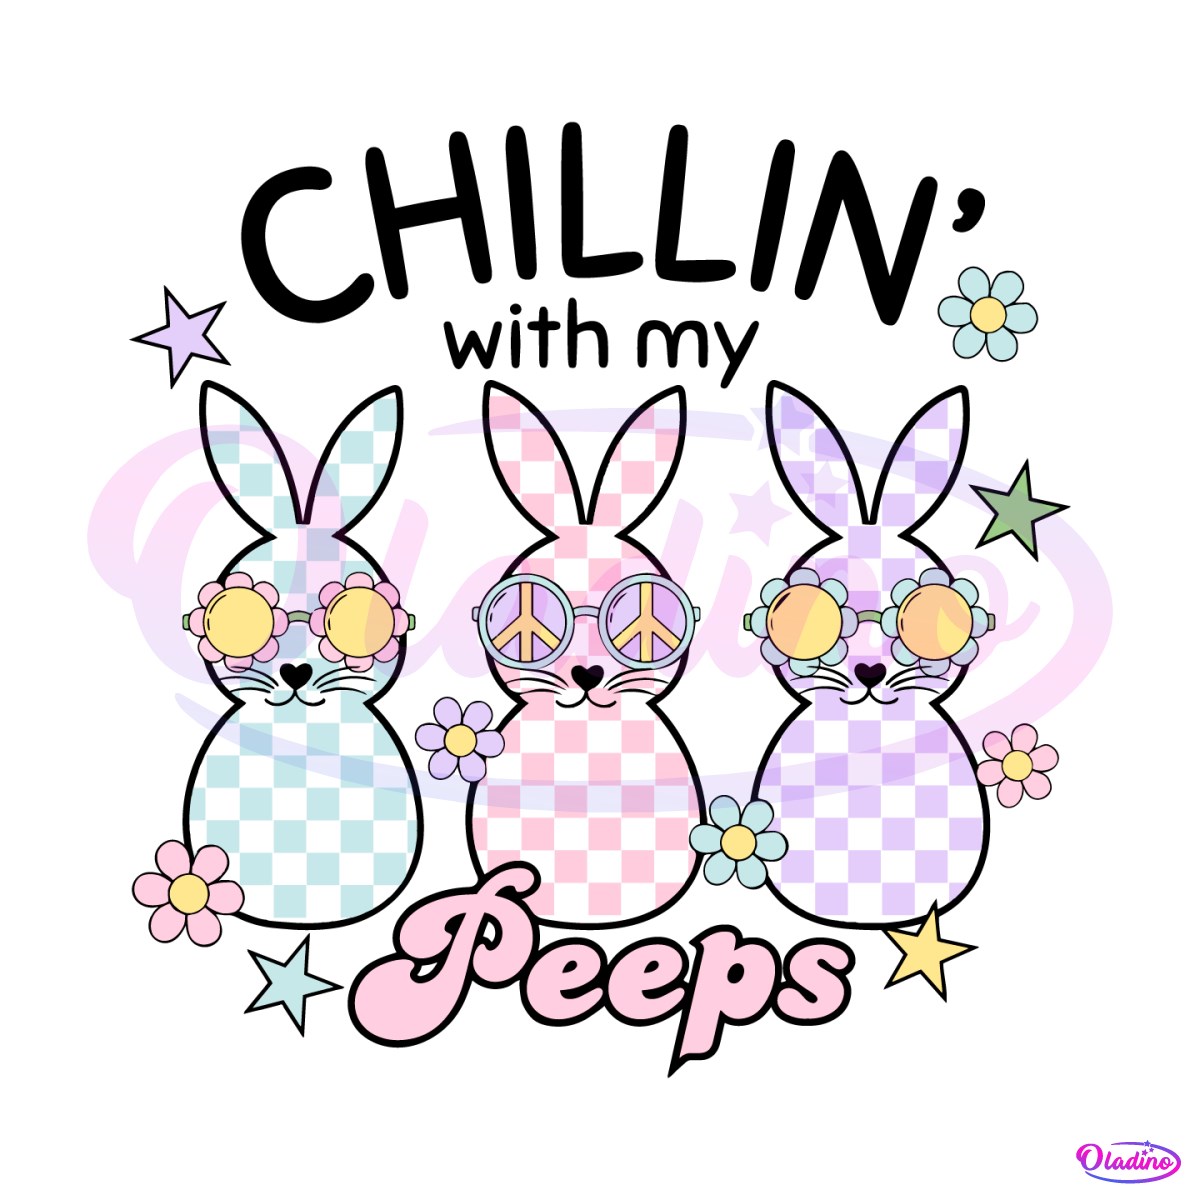 funny-easter-chillin-with-my-peeps-svg